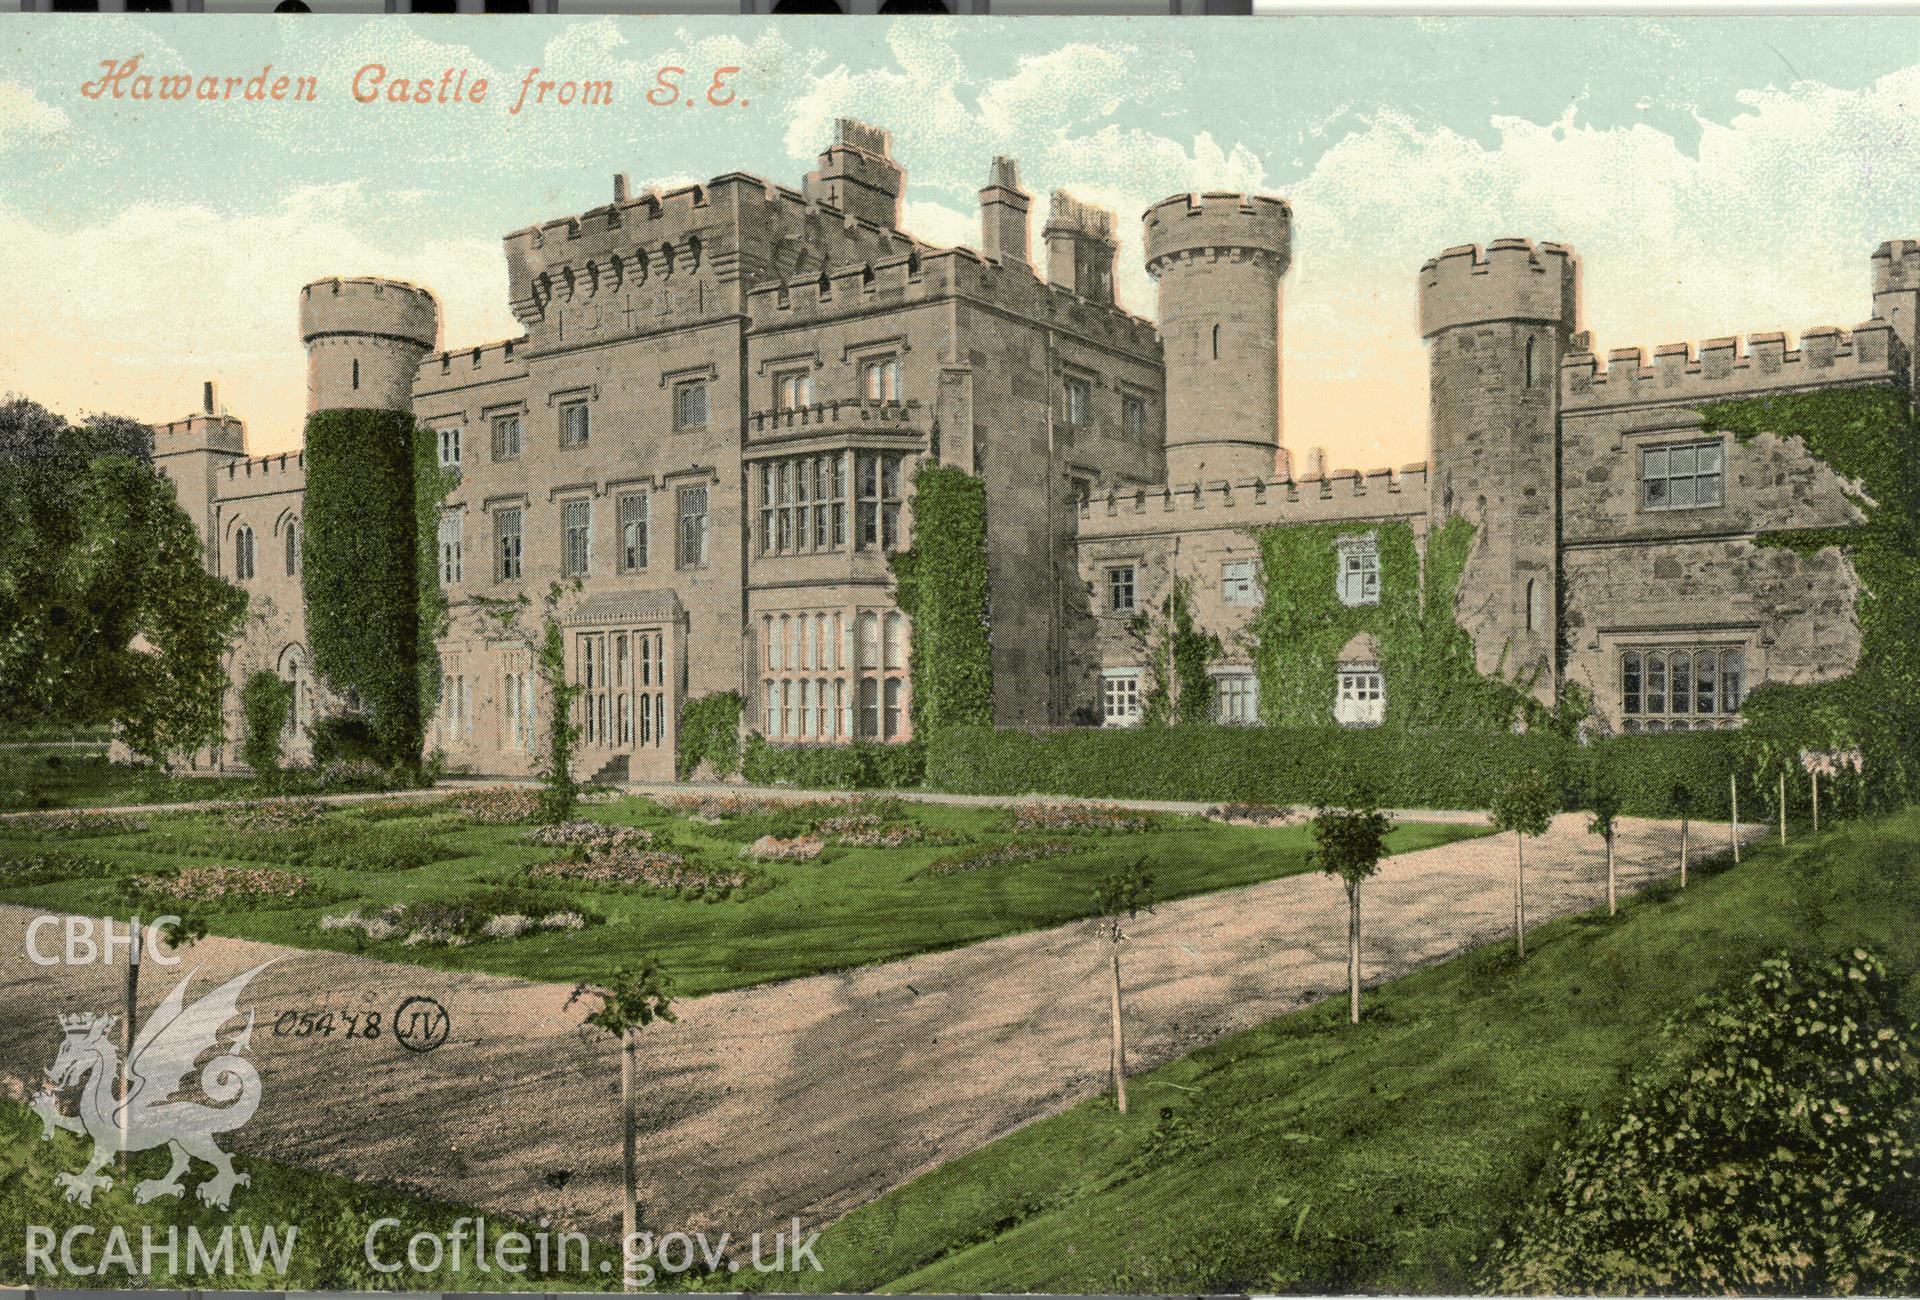 Digitised postcard image of Hawarden Castle, Valentine's Series. Produced by Parks and Gardens Data Services, from an original item in the Peter Davis Collection at Parks and Gardens UK. We hold only web-resolution images of this collection, suitable for viewing on screen and for research purposes only. We do not hold the original images, or publication quality scans.